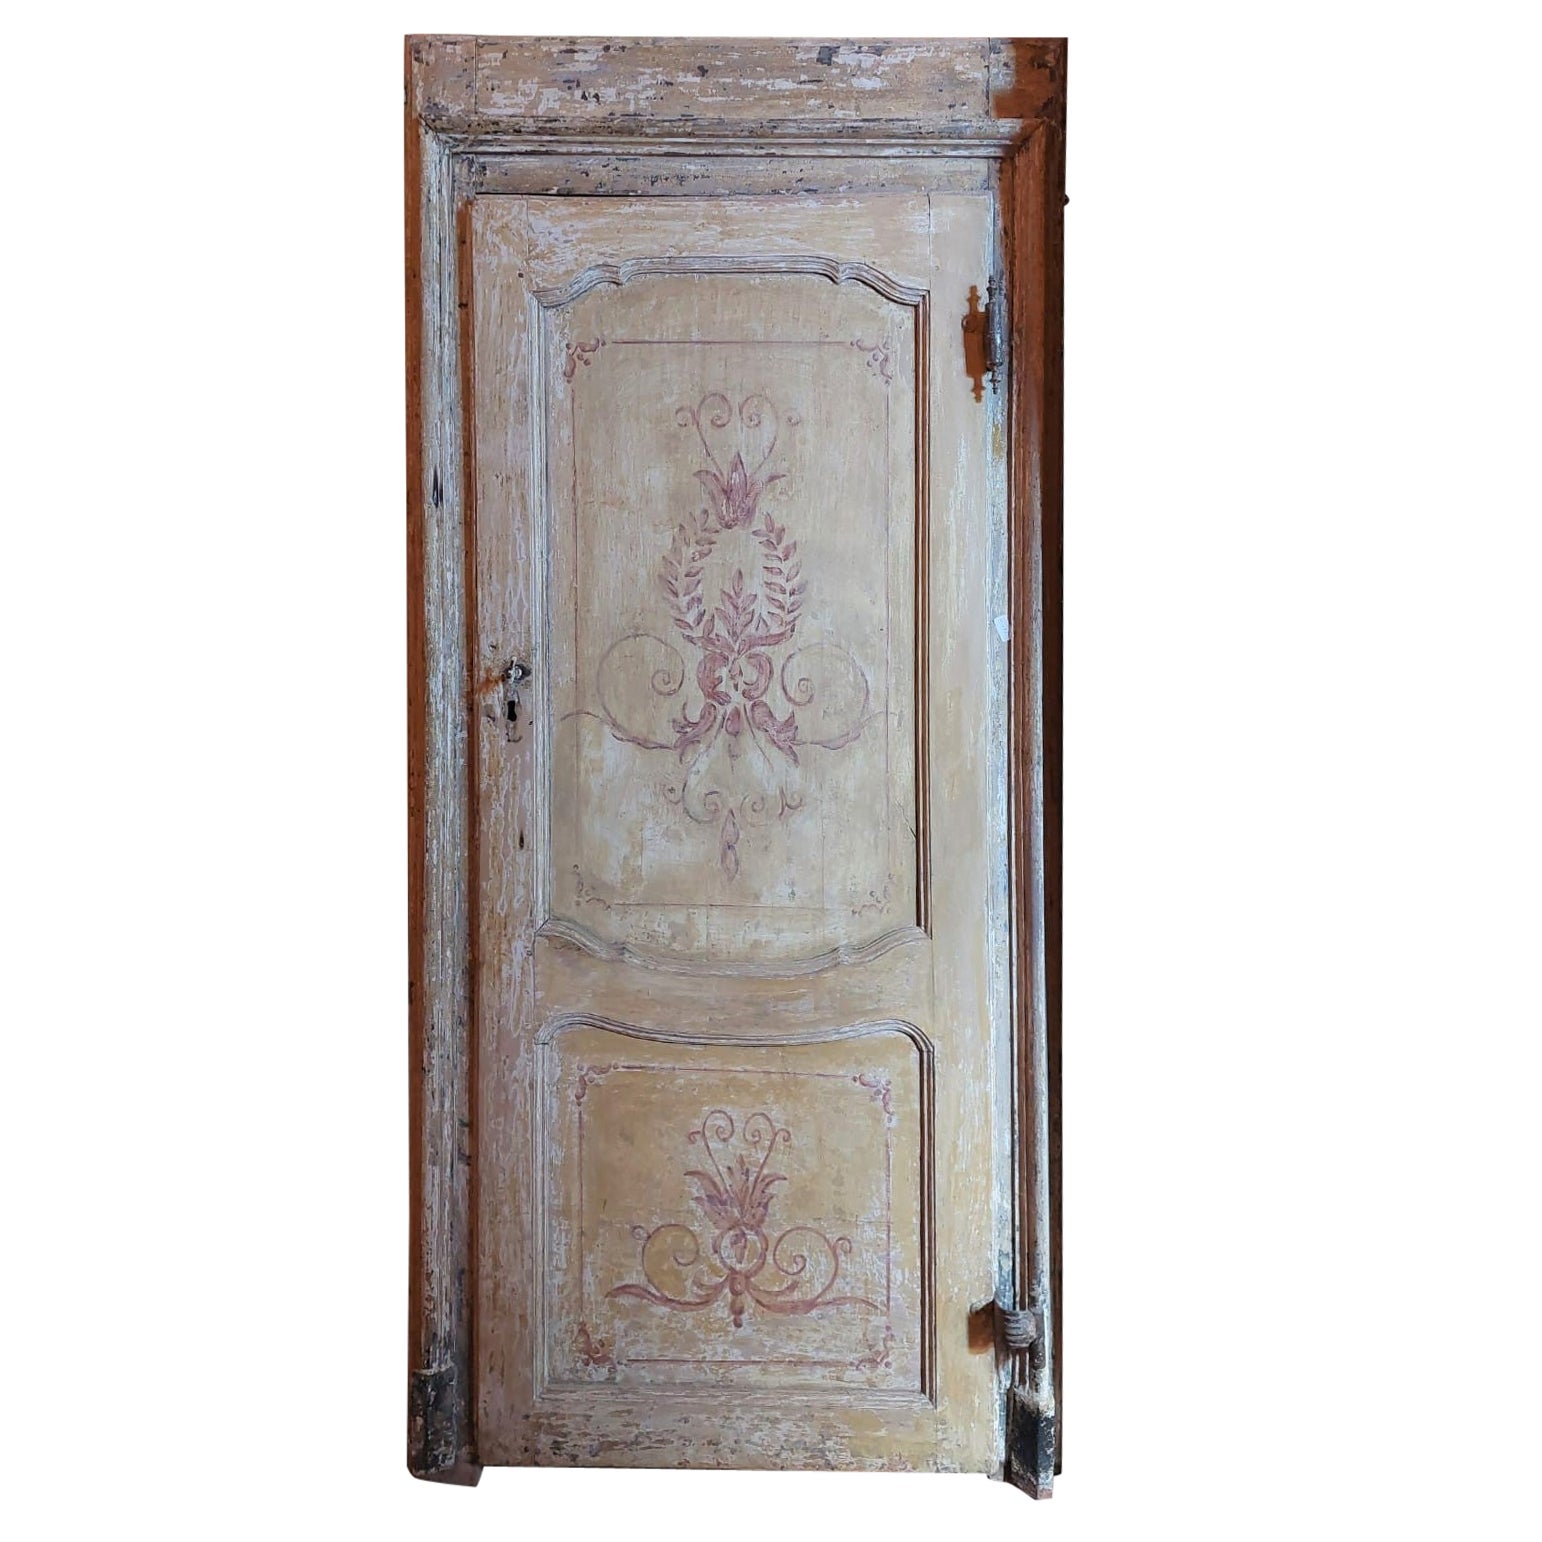 Antique painted door complete with frame and irons, yellow, 18th century Italy